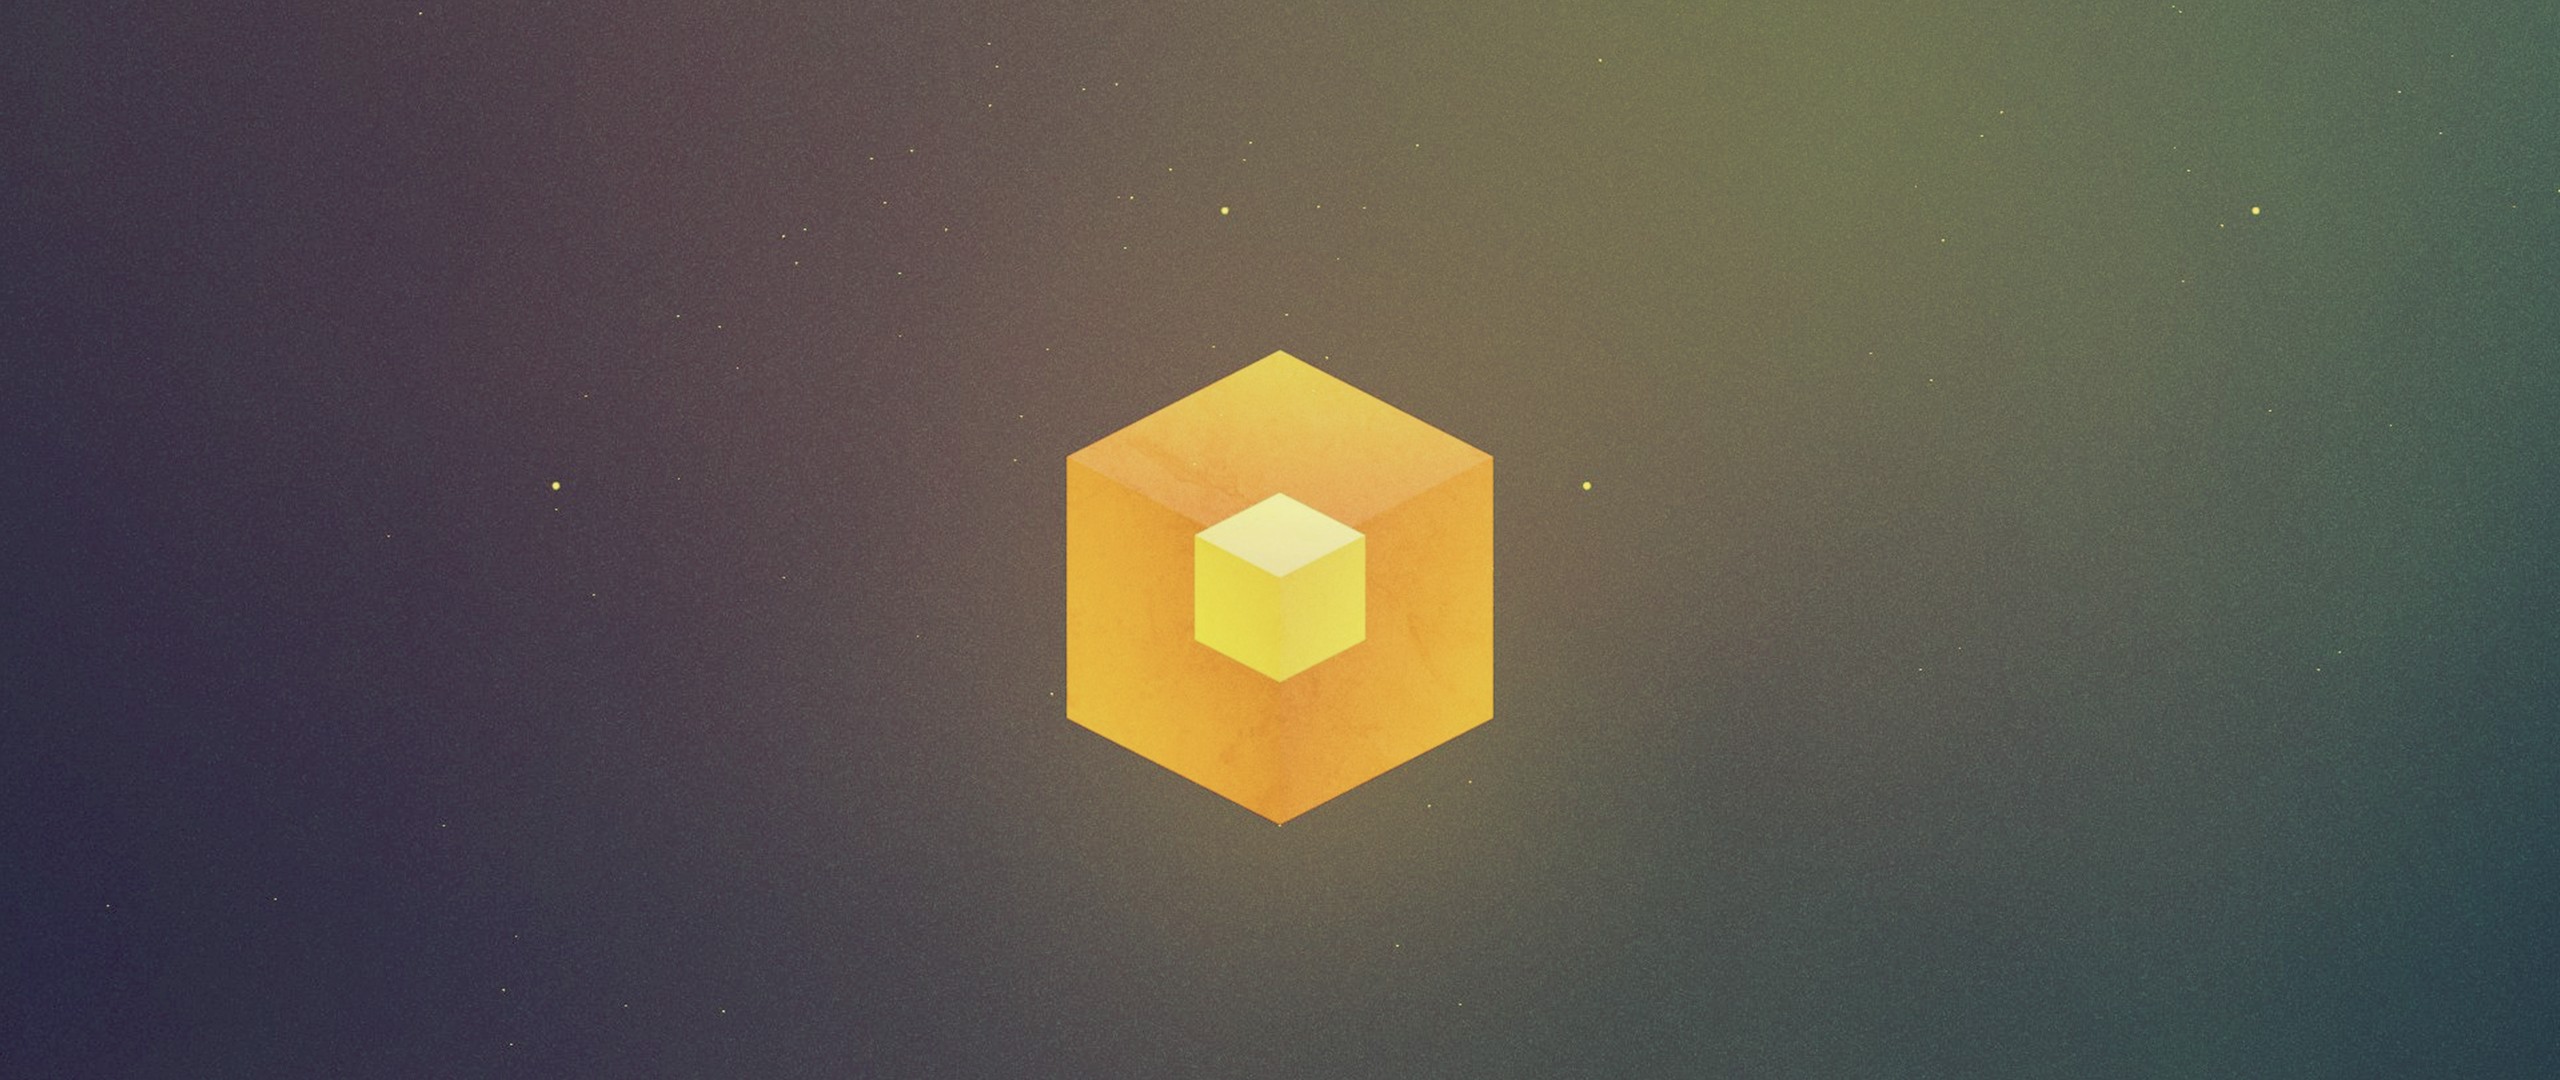 ultra wide, Minimalism, Cube, Low poly Wallpaper